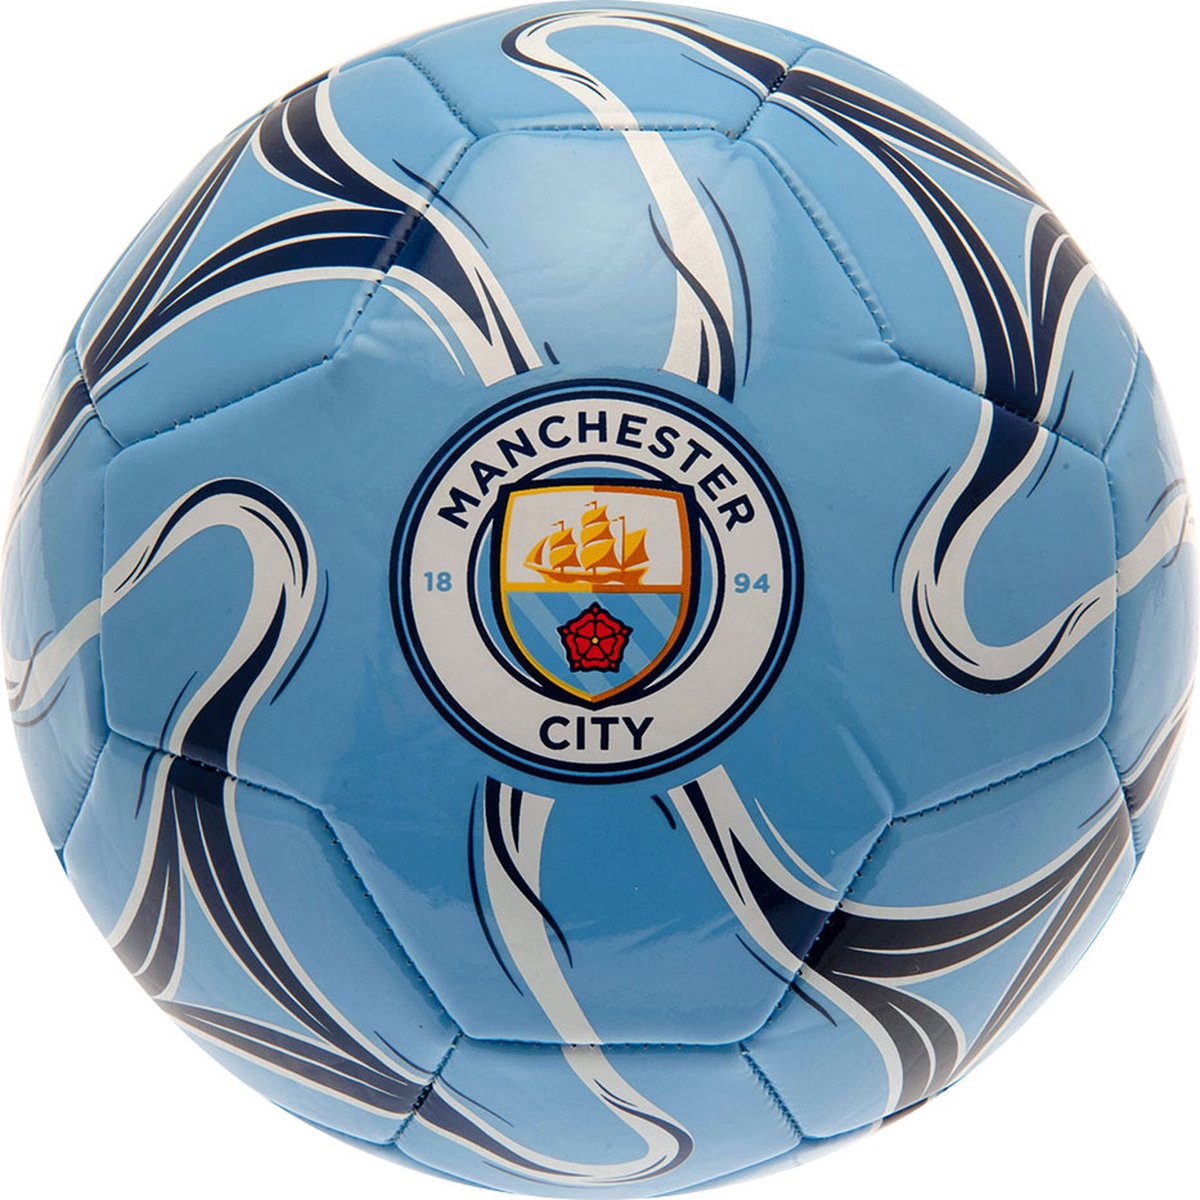 Manchester City Voetbal CC Maat 5 (Blauw)